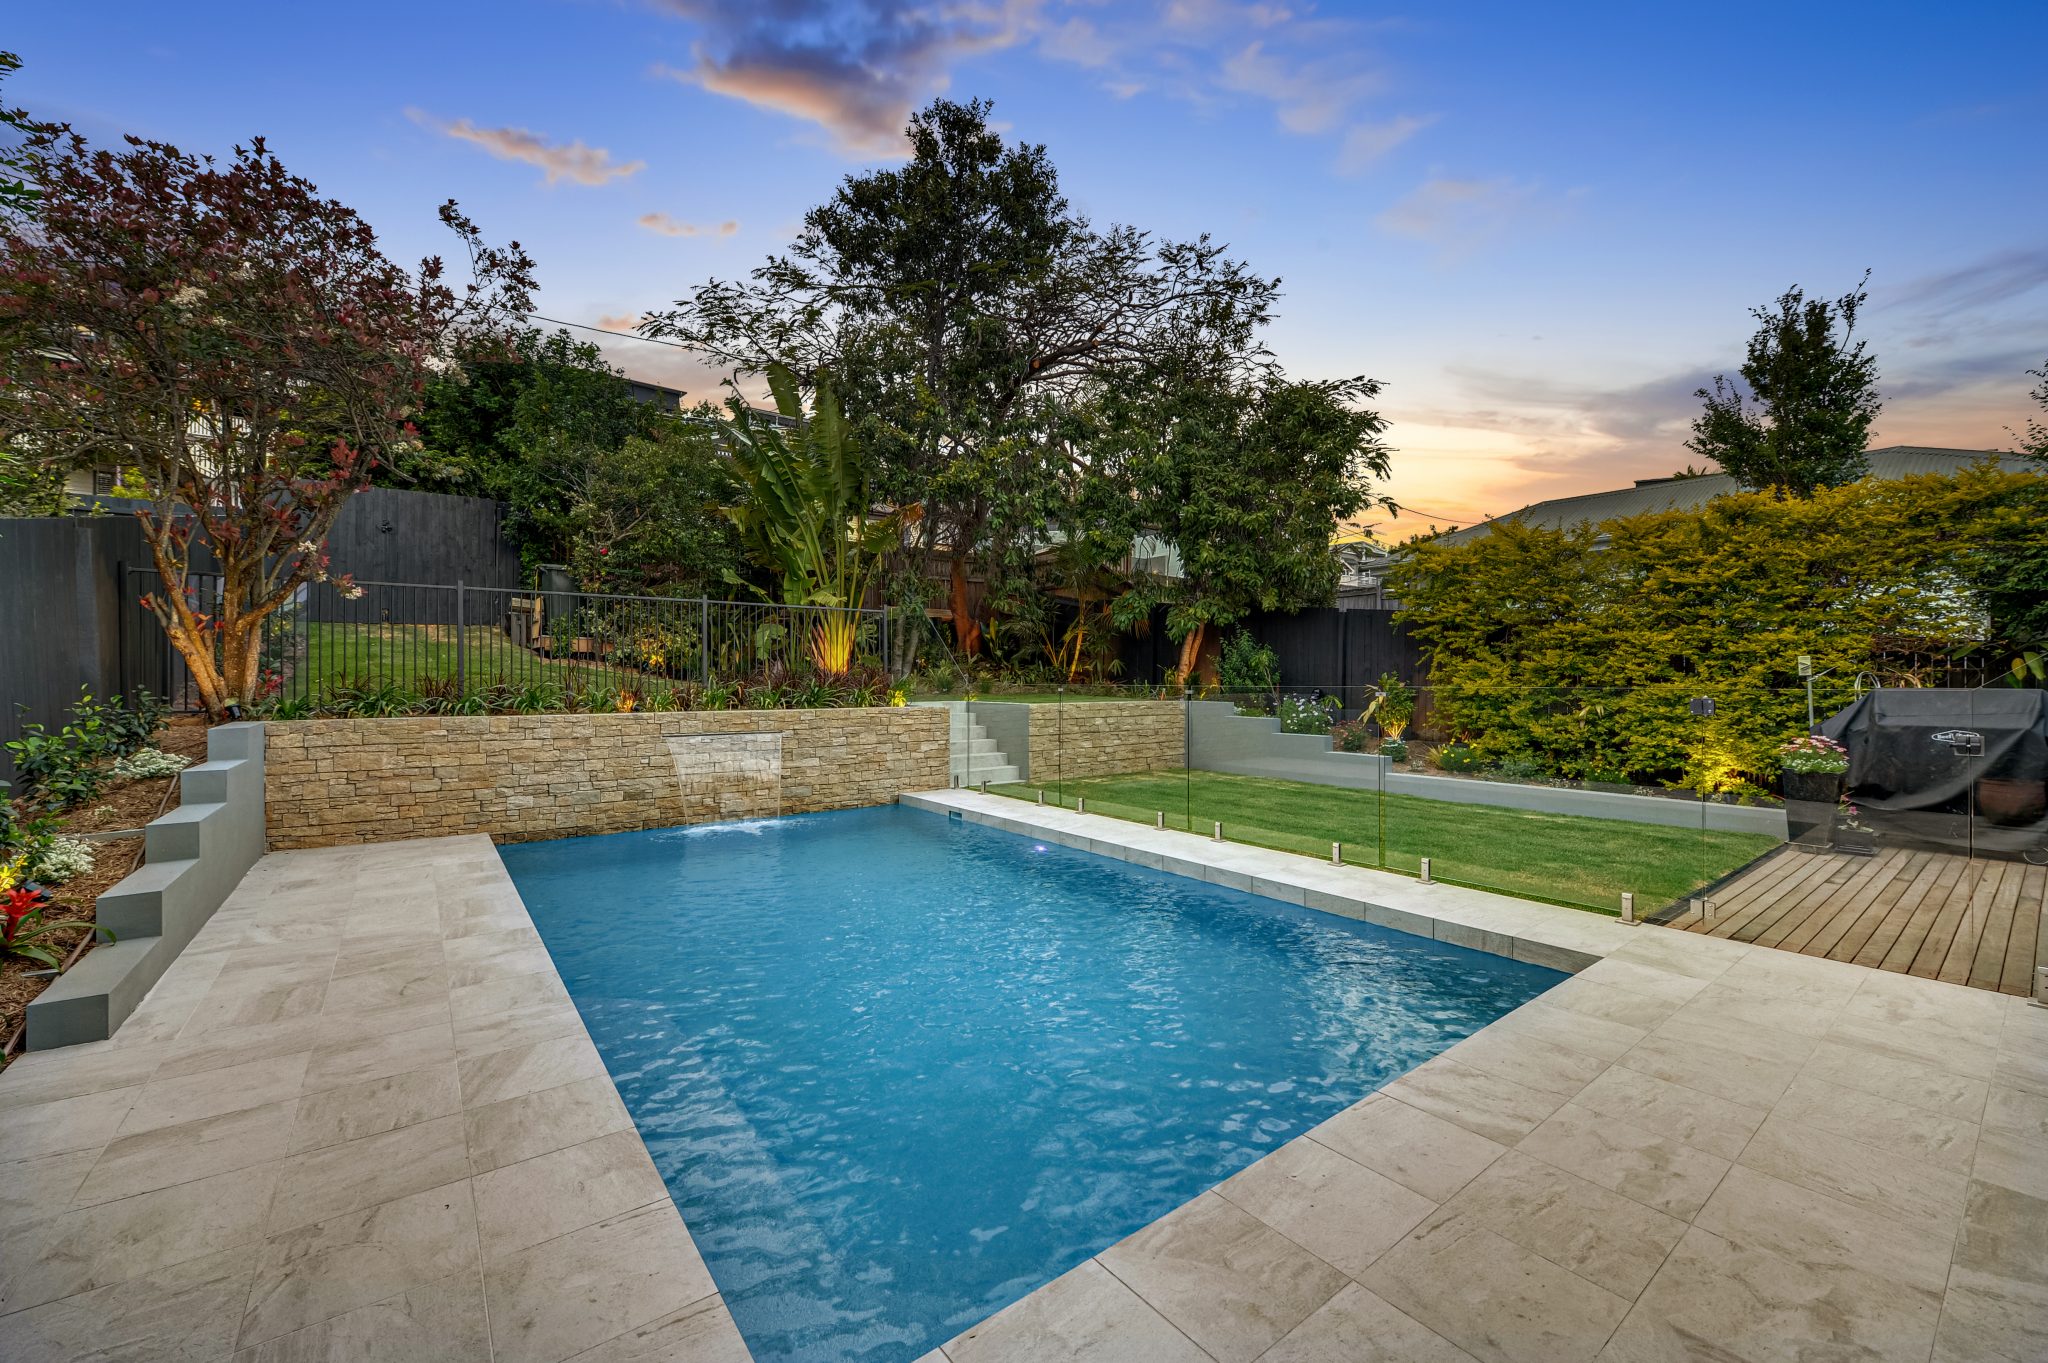 6 Things You Need To Know Before Building A Pool